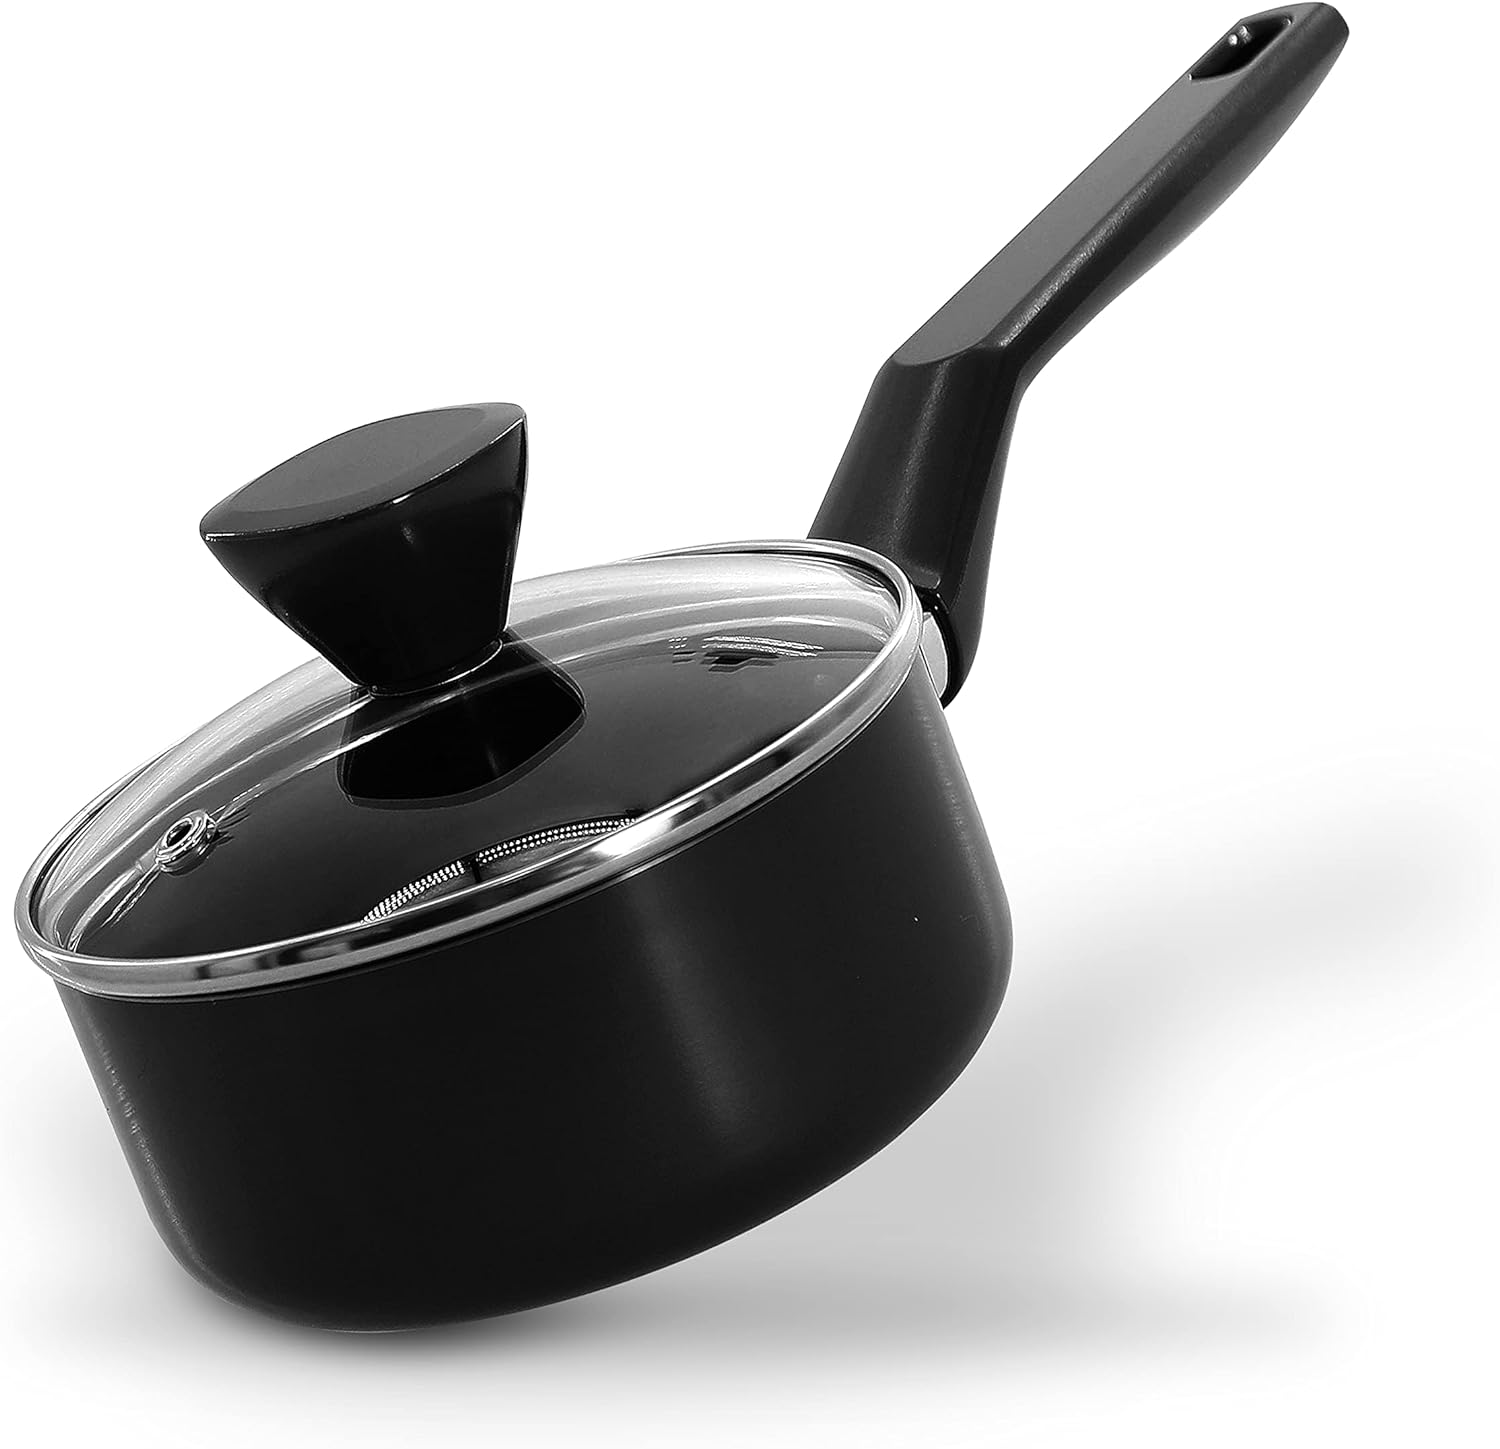 NutriChef Saucepan Pot with Lid – Non-Stick High-Qualified Kitchen Cookware with See-Through Tempered Glass Lids, 1 QT. (Works with Model: NCCWA13)